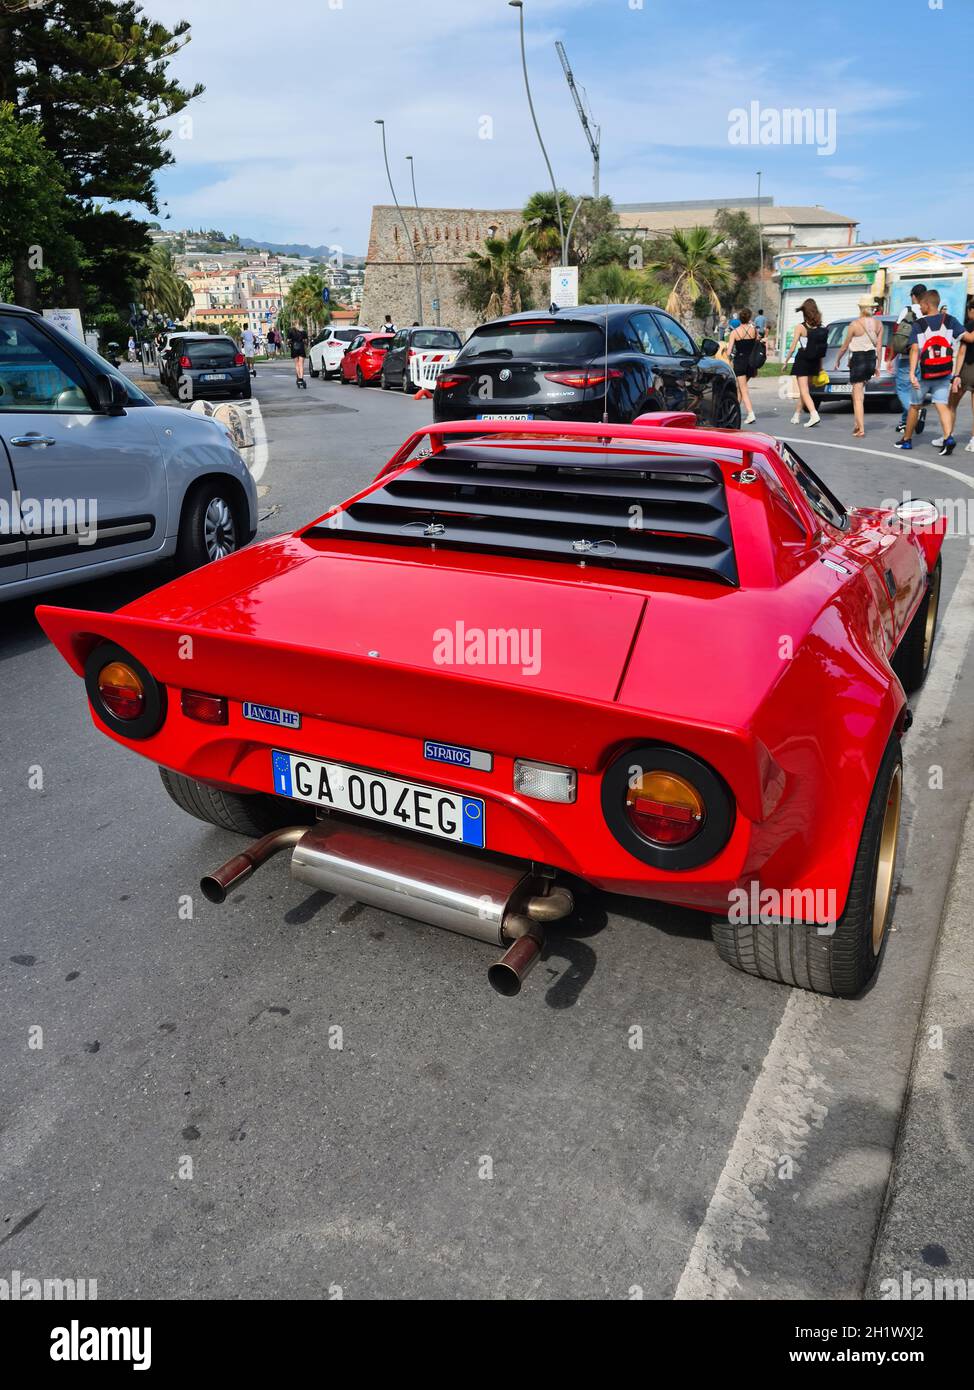 San Remo, Italy - August 8, 2021: Red Lancia Stratos HF Rally Italian Sports Car Parked In The Street Of San Remo In Italy, Europe. Close Up Rear View Stock Photo